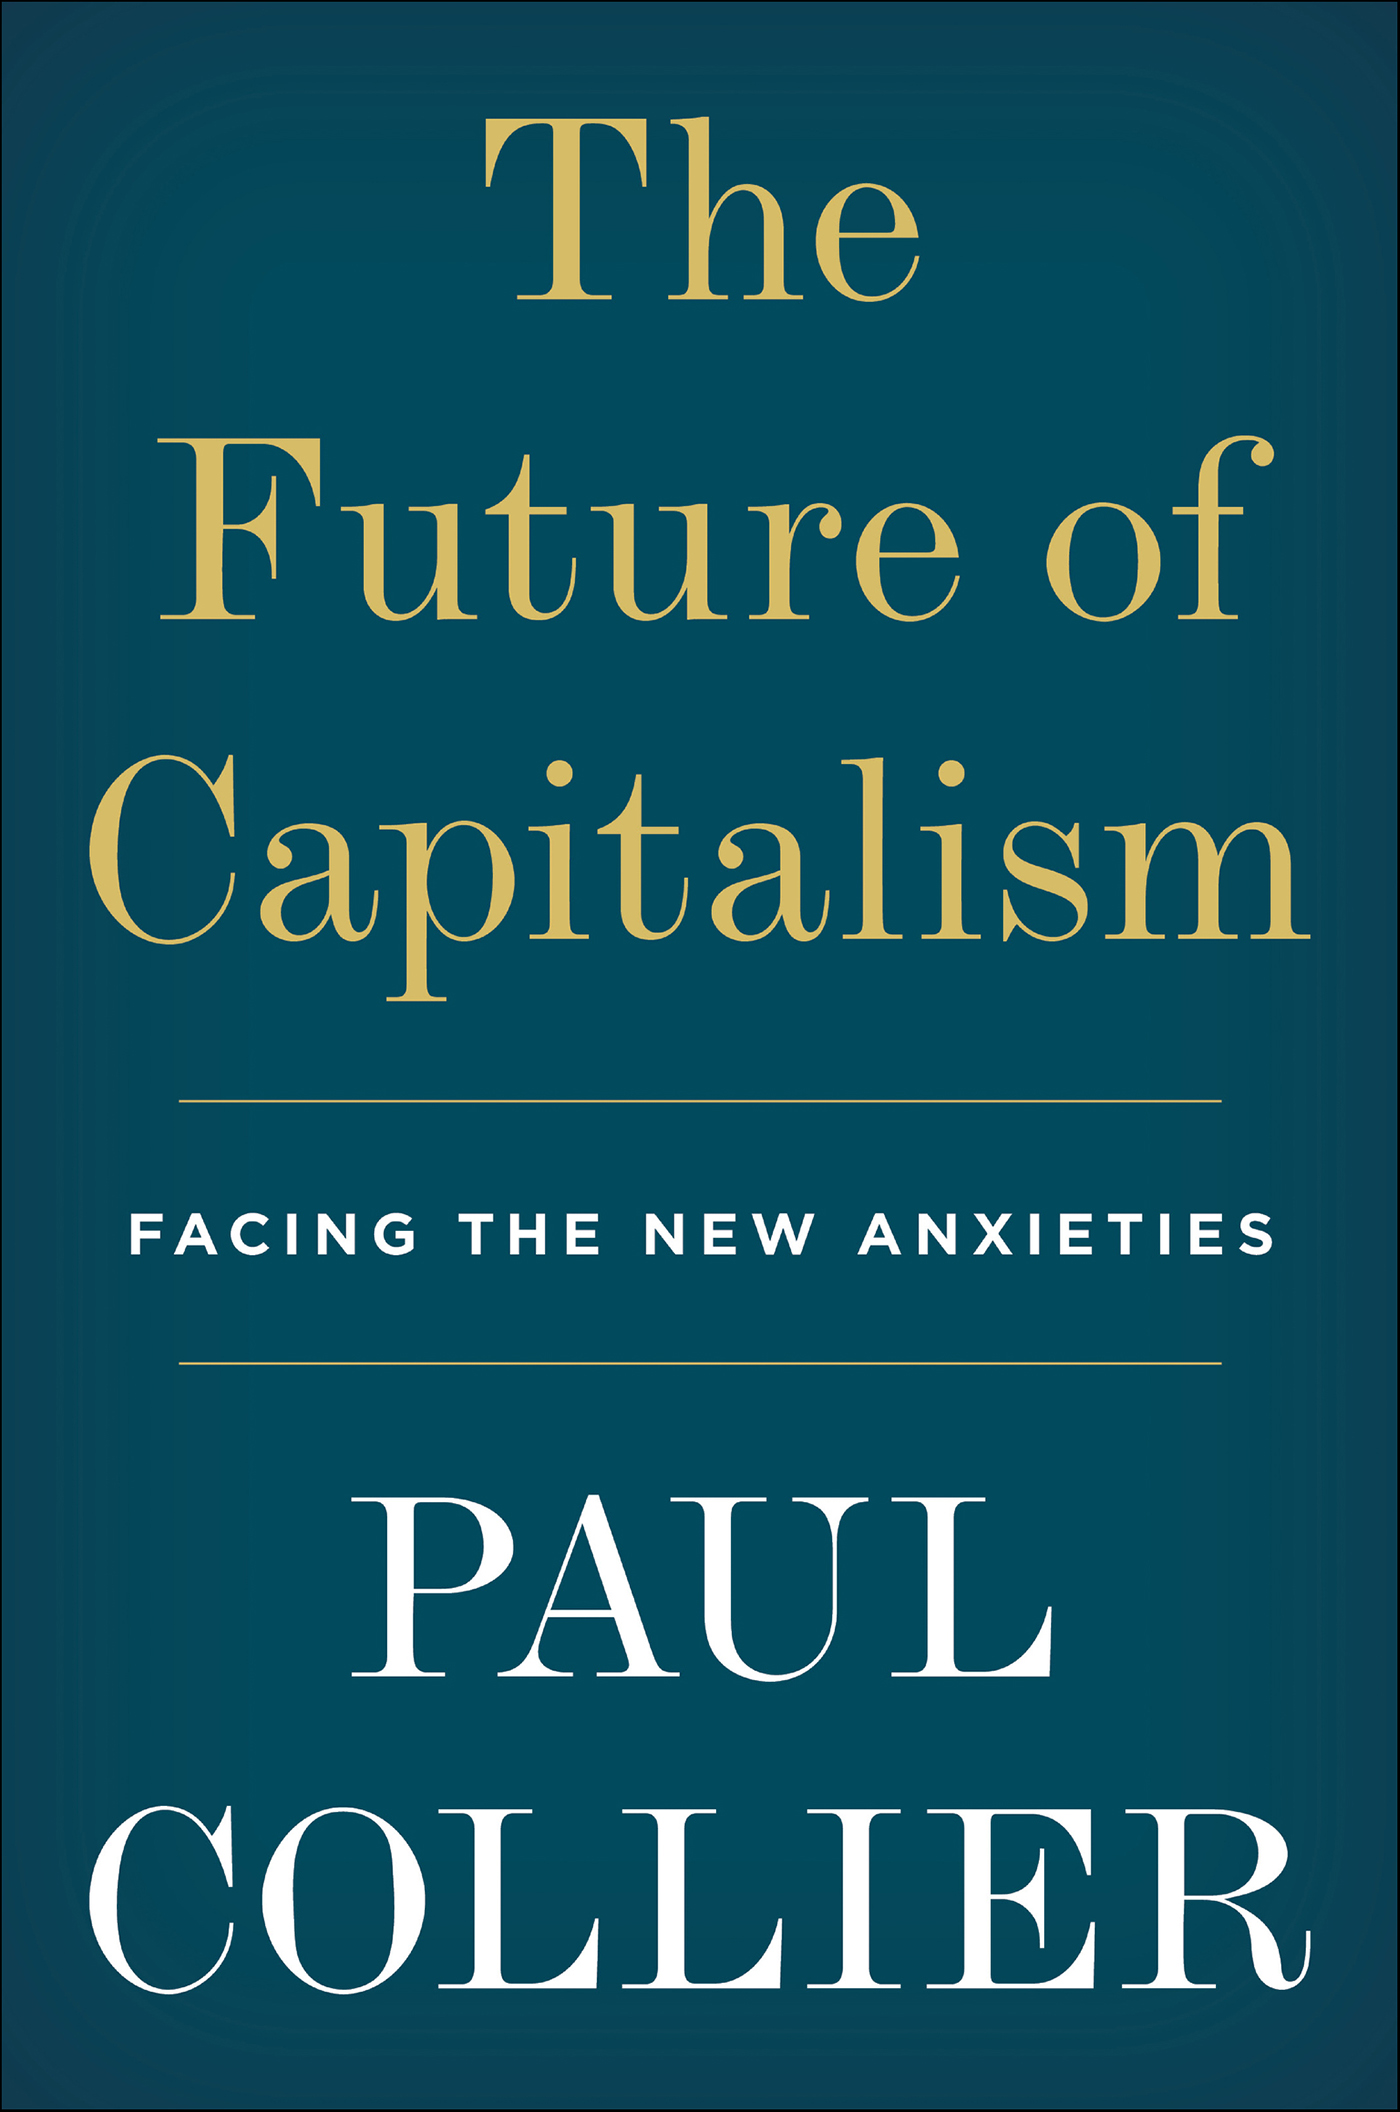 Image de couverture de The Future of Capitalism [electronic resource] : Facing the New Anxieties